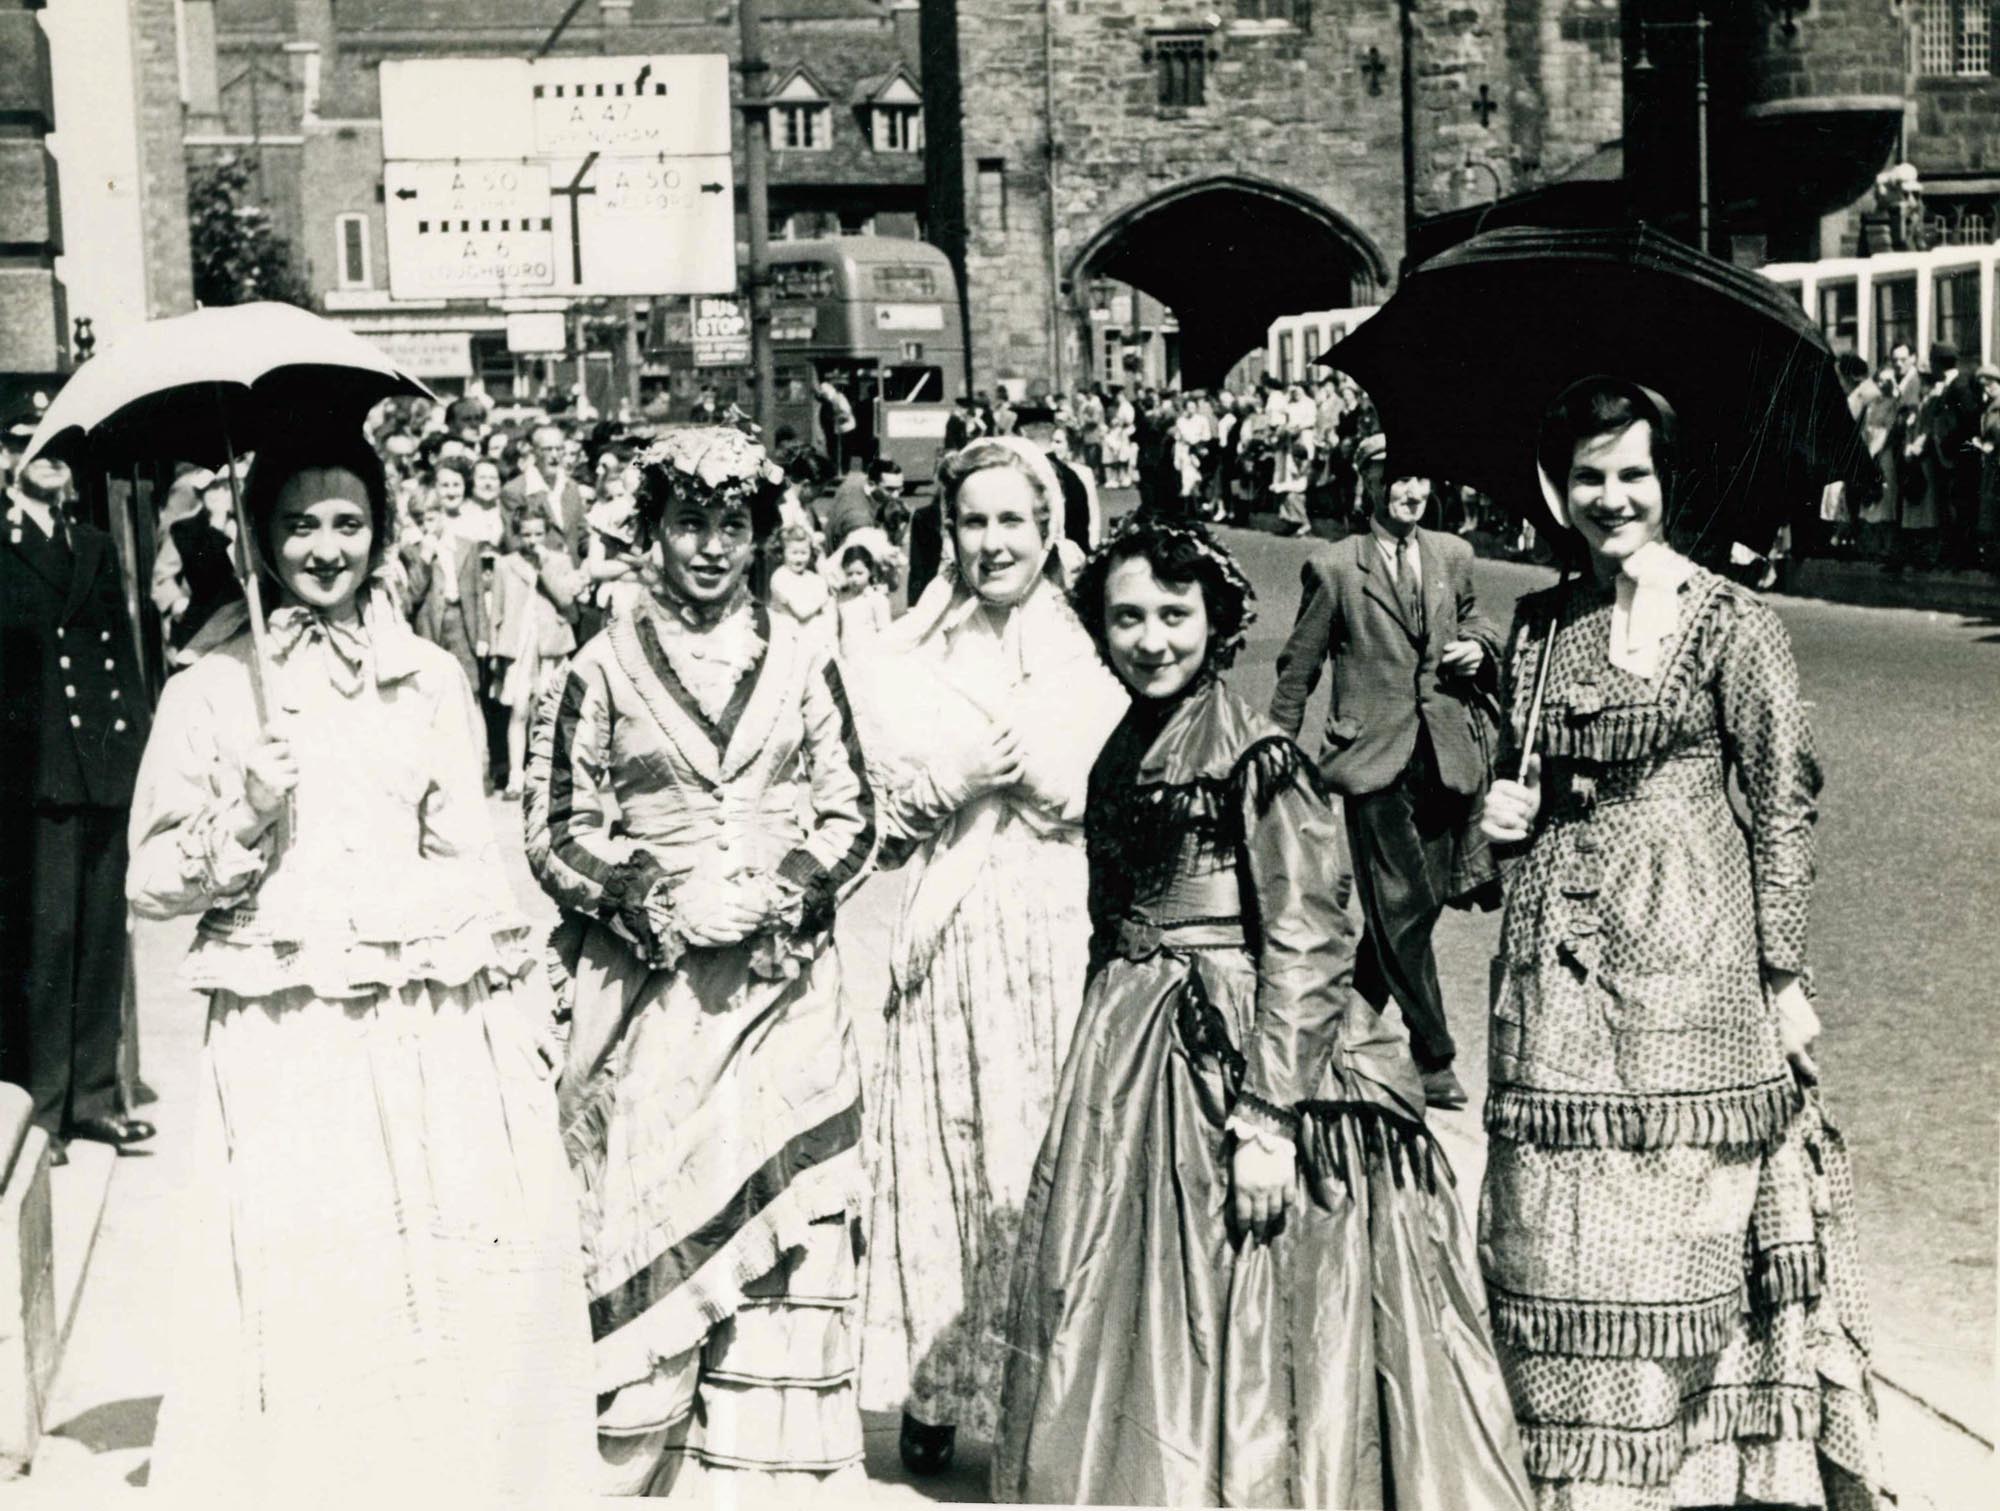 People in historic dress at the opening of Newarke House in 1953. Leicestershire Record Office.